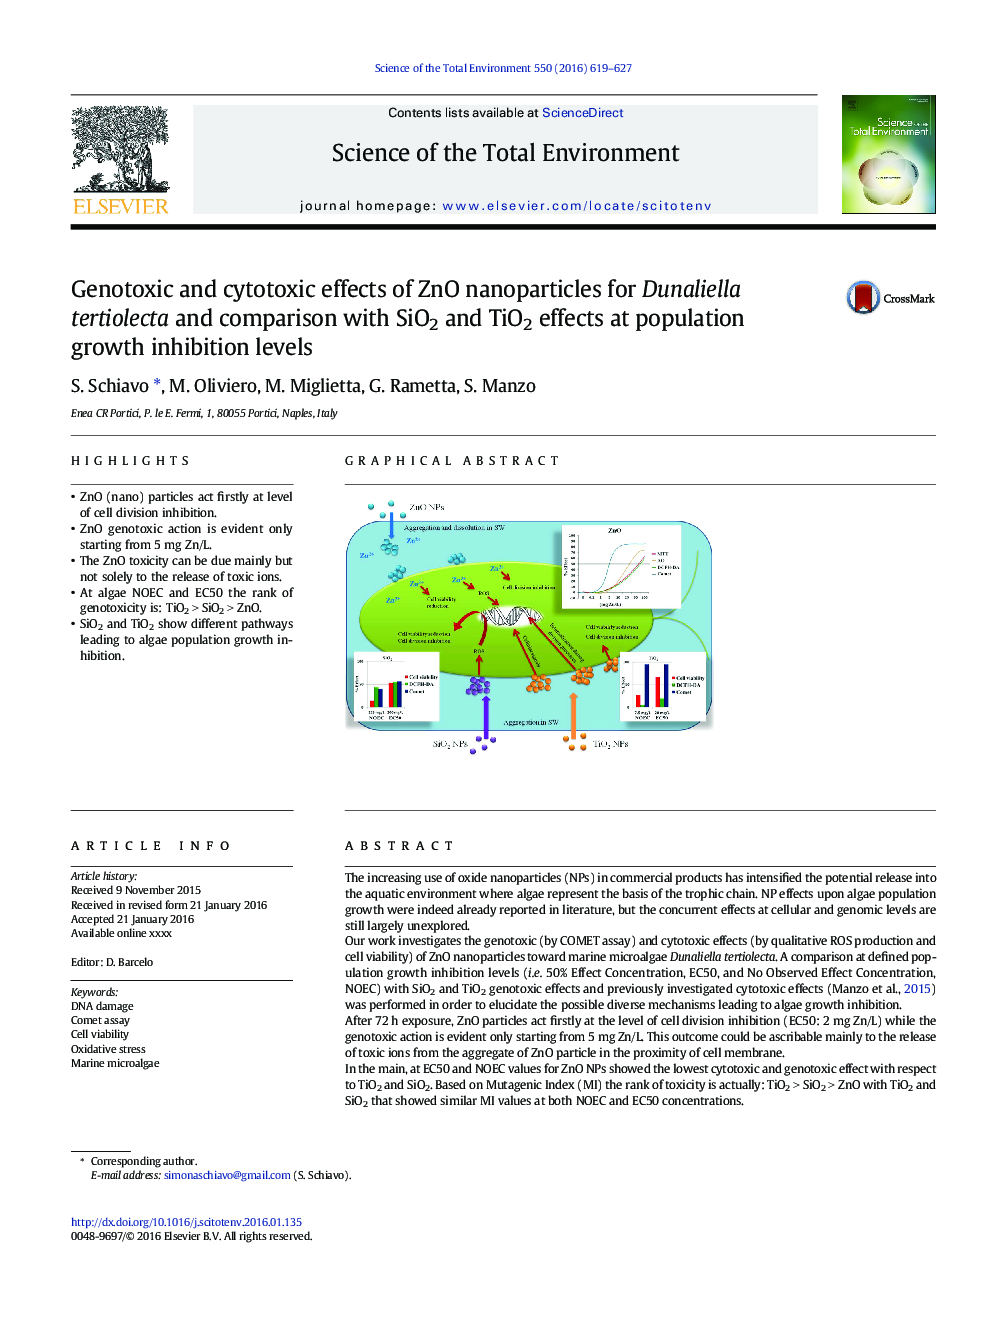 Genotoxic and cytotoxic effects of ZnO nanoparticles for Dunaliella tertiolecta and comparison with SiO2 and TiO2 effects at population growth inhibition levels